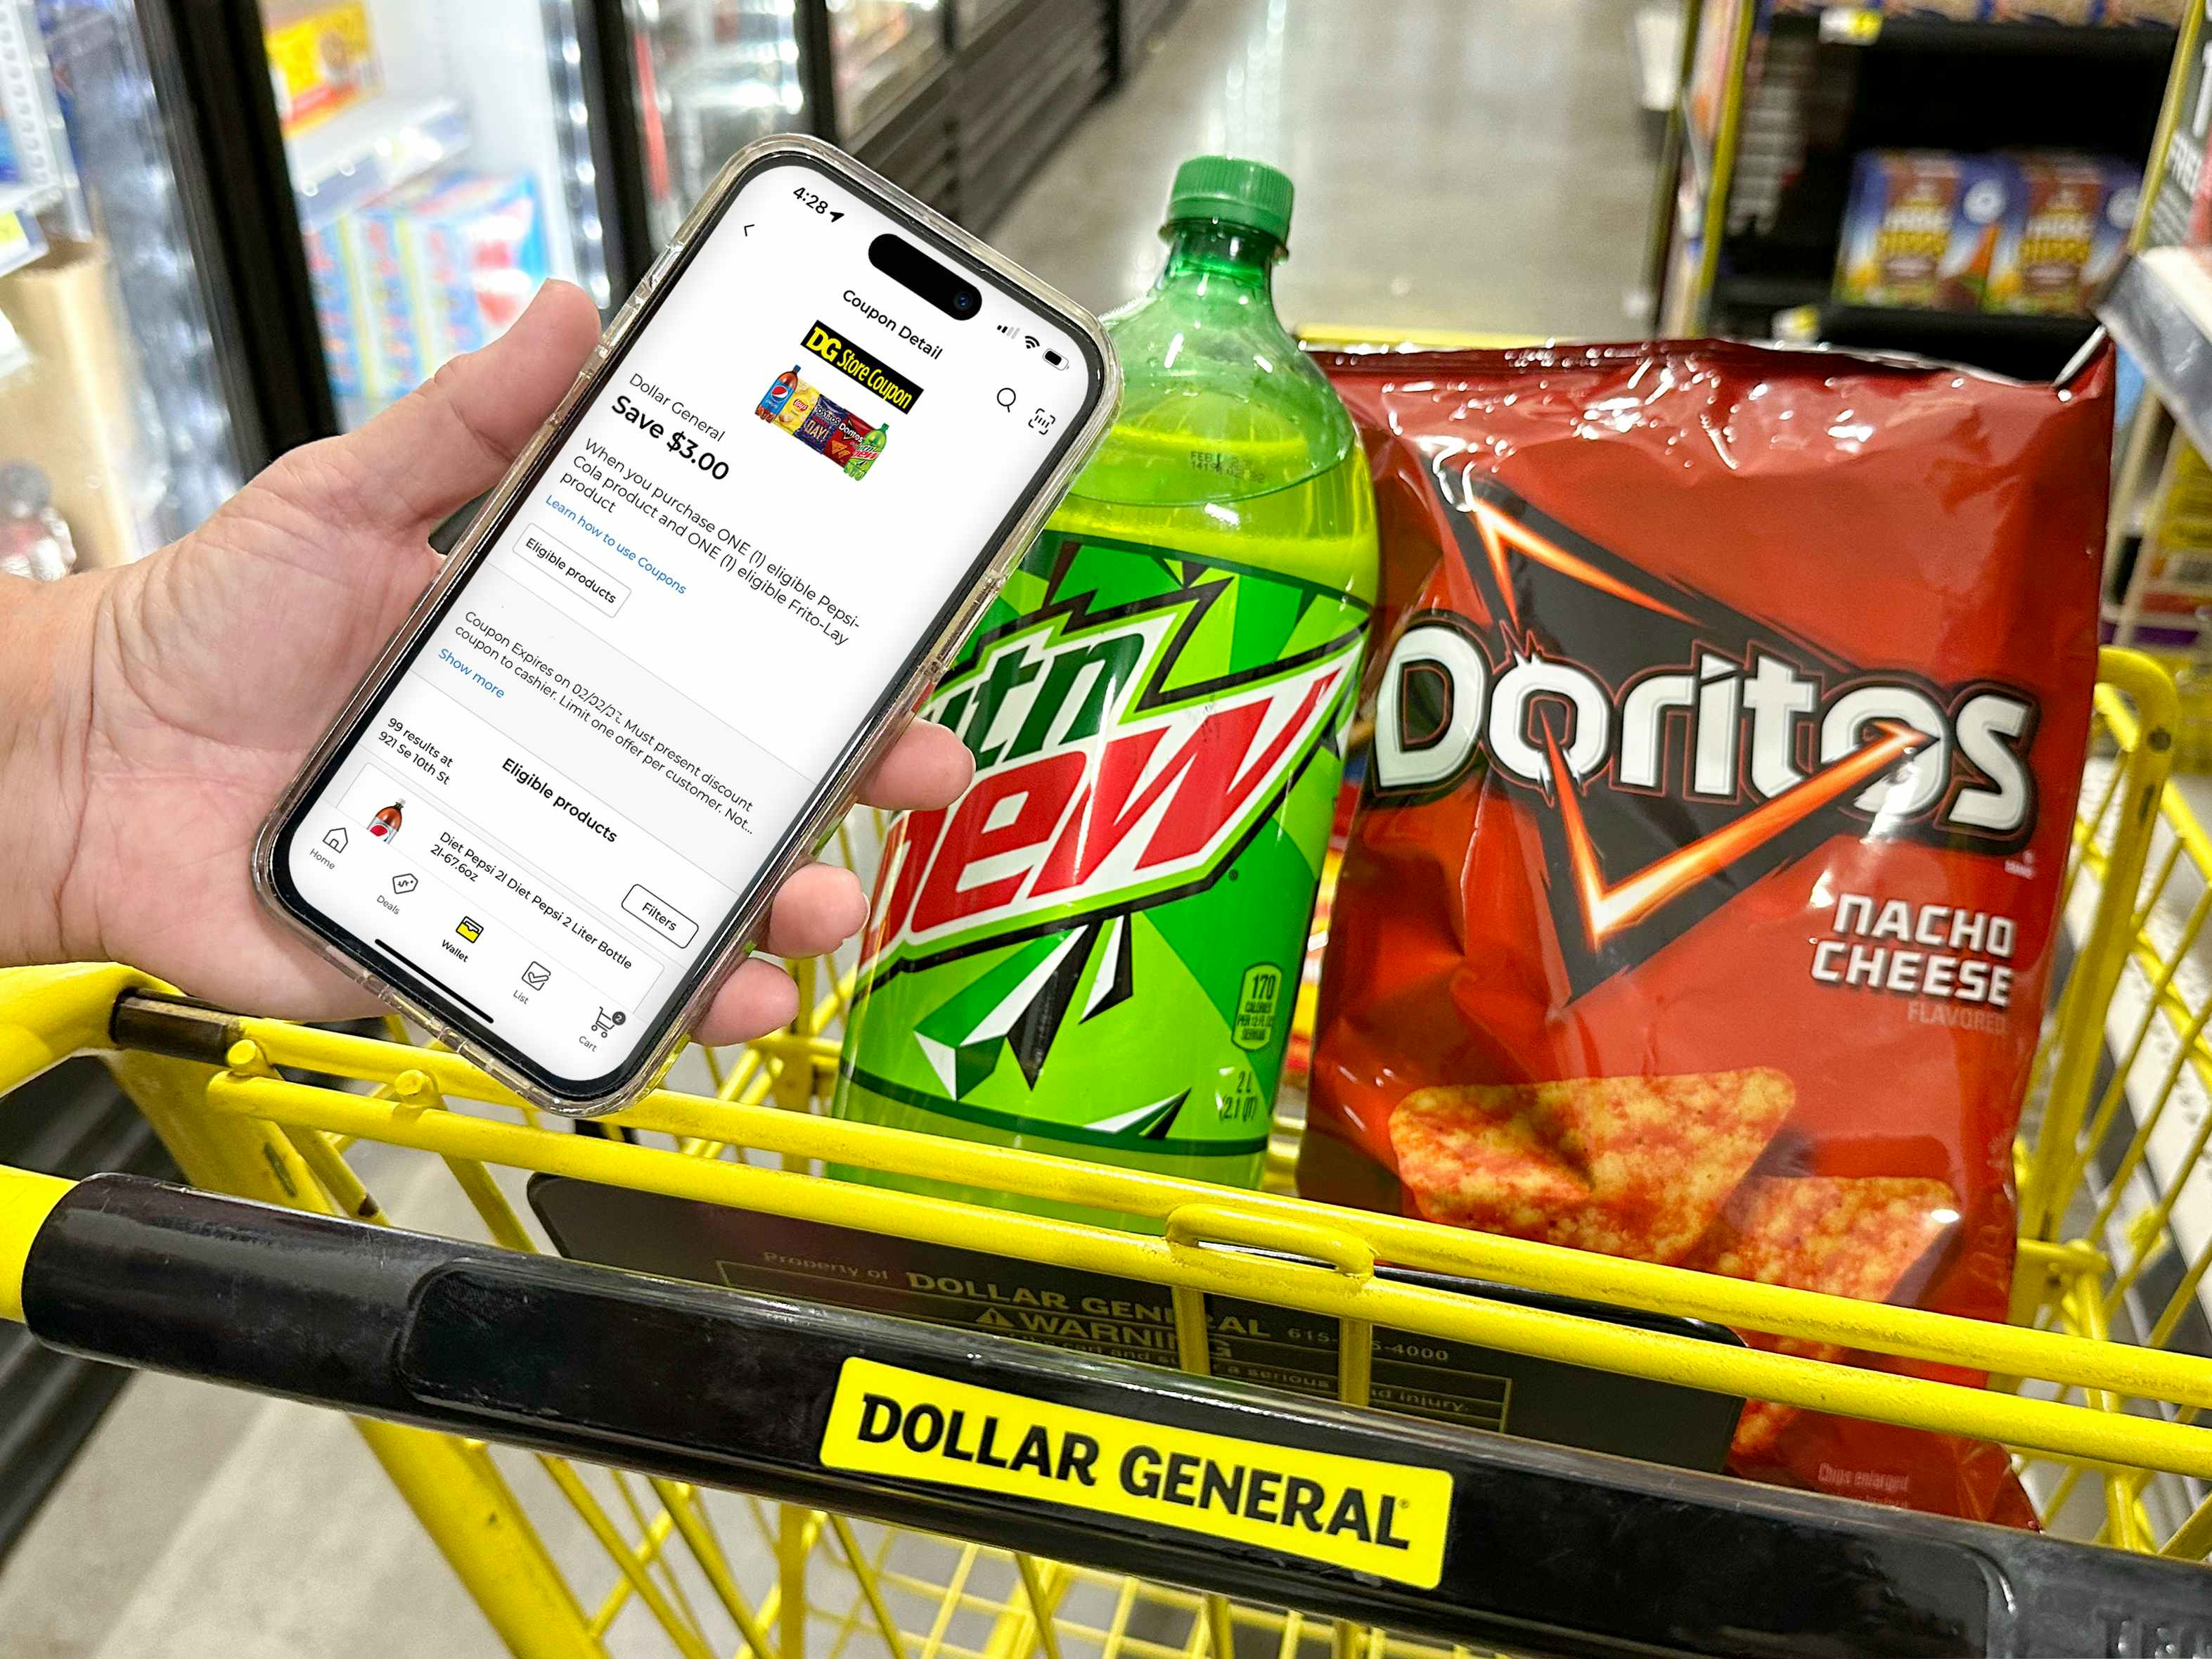 Someone holding up a phone displaying a digital coupon on the Dollar General app next to a cart with products